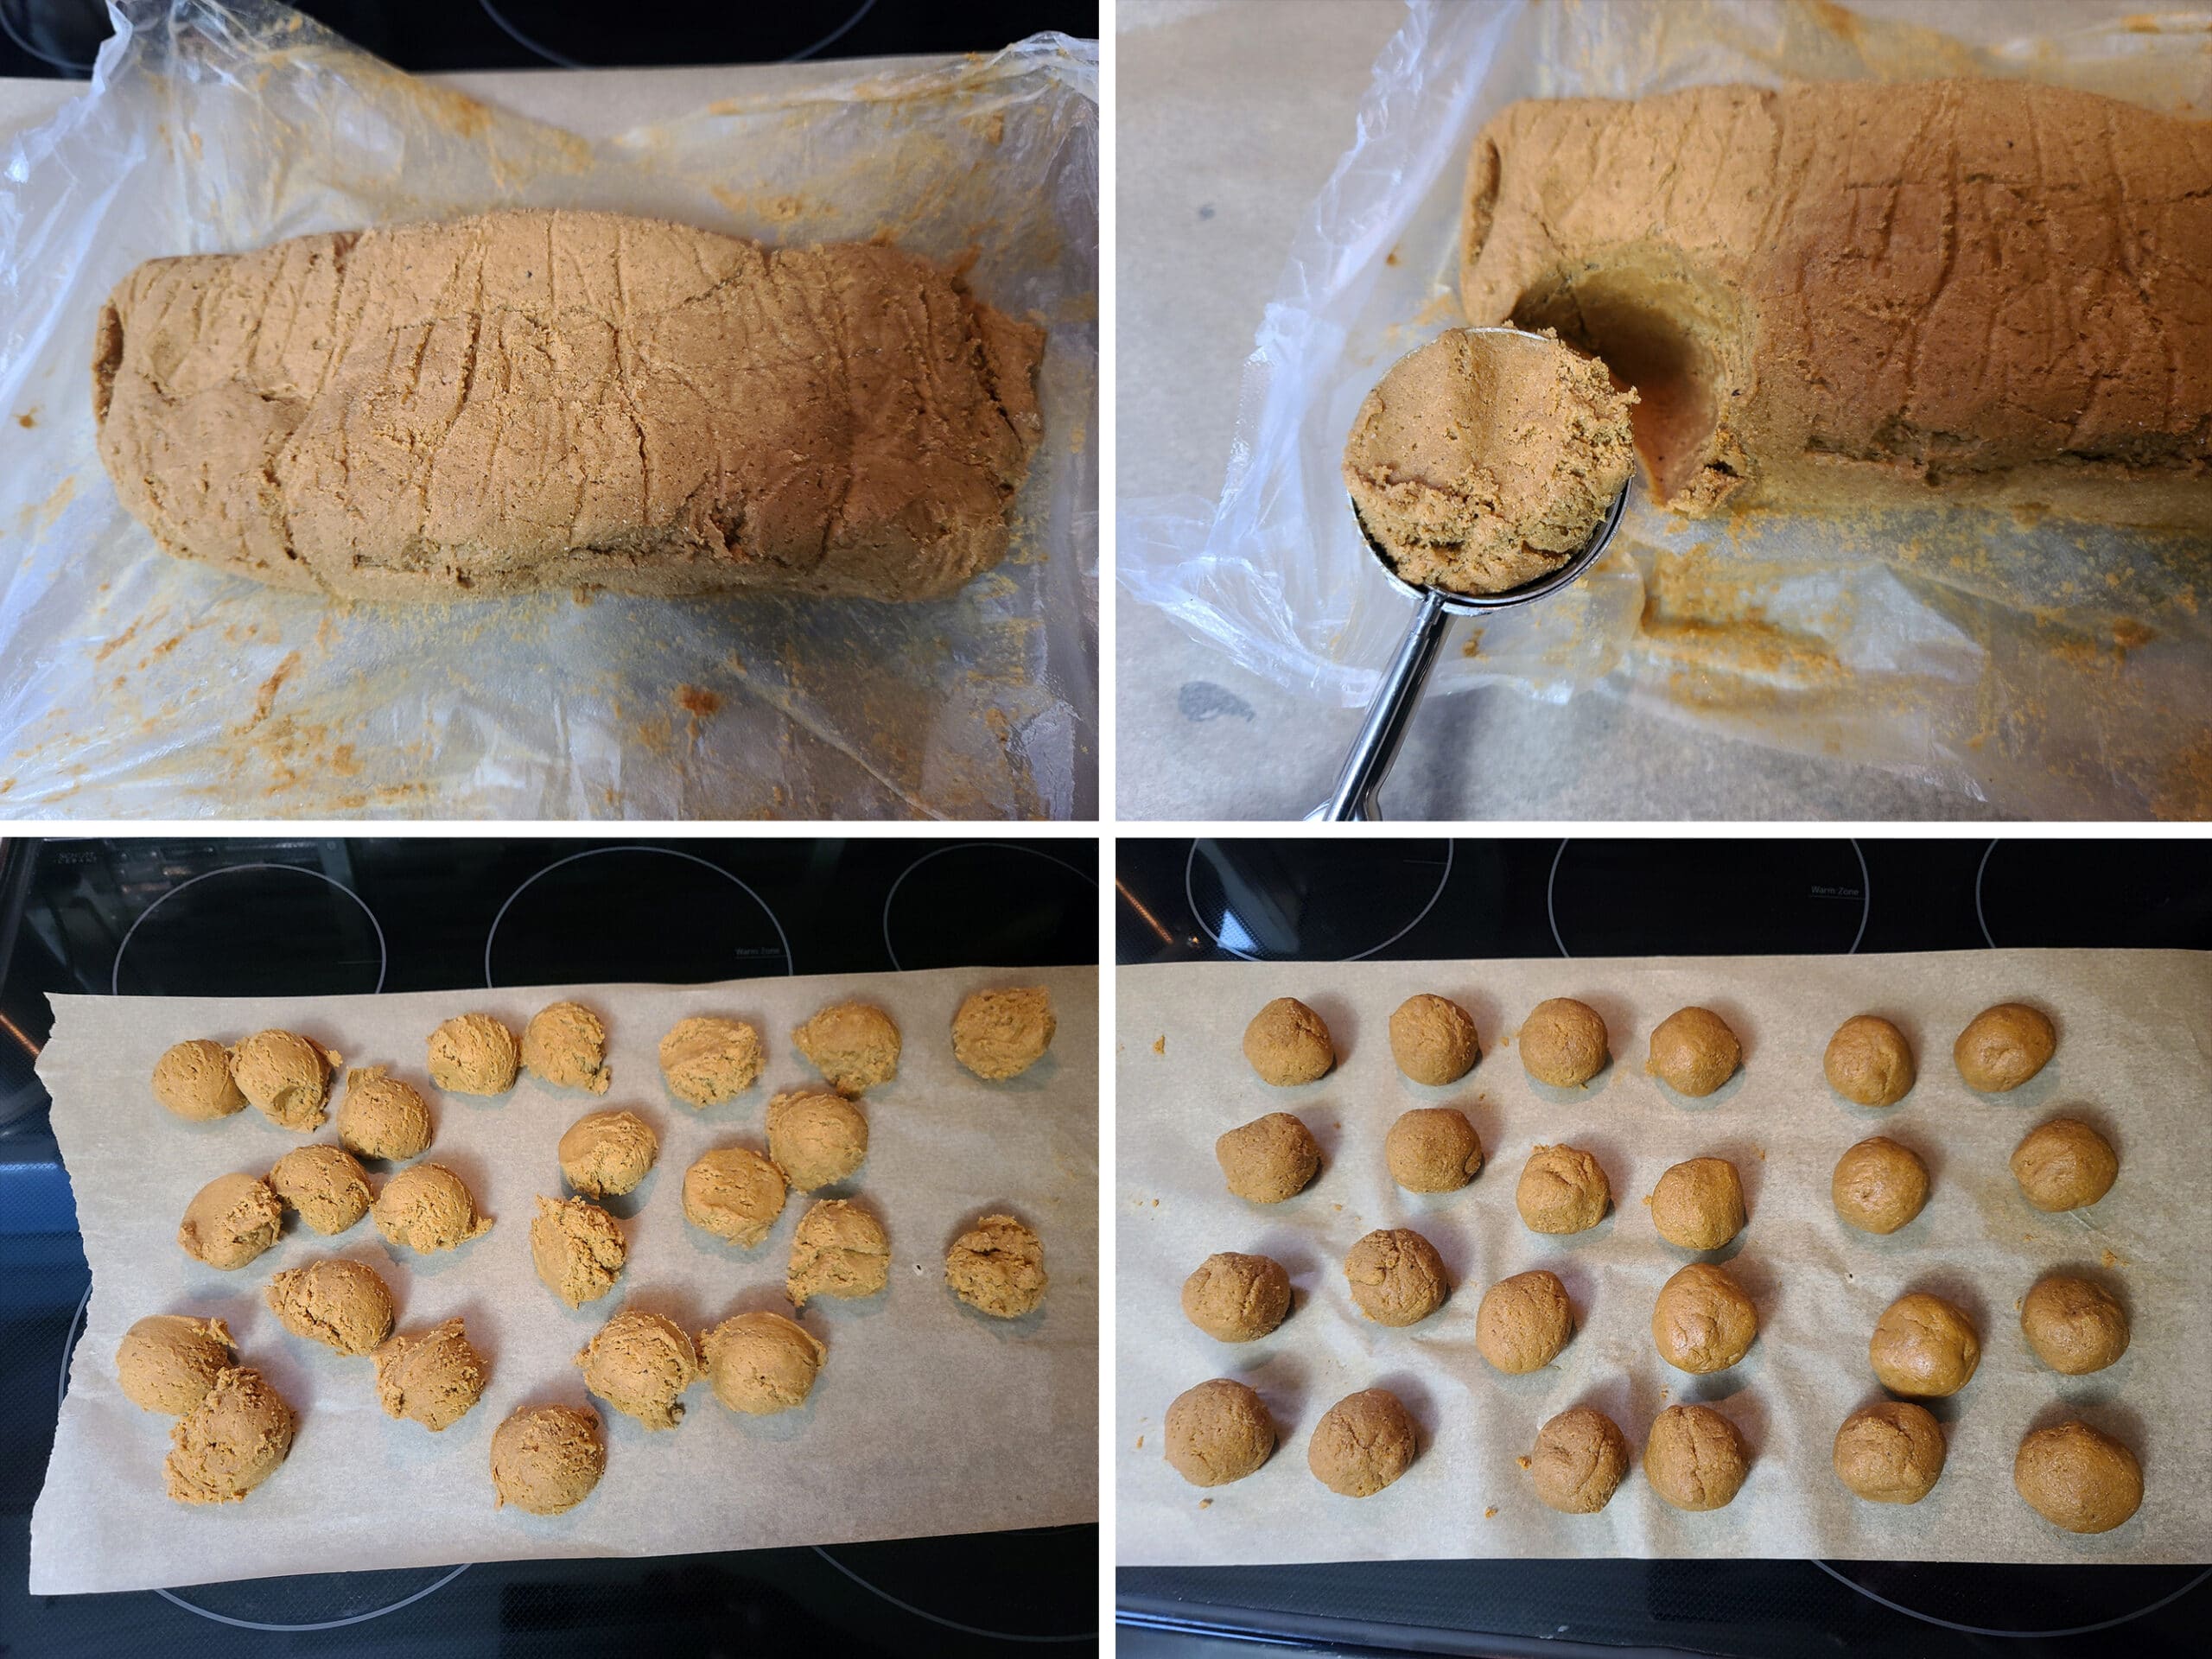 4 part image showing an ice cream scoop portioning out the gluten free cookie batter, then the batter being rolled into balls.